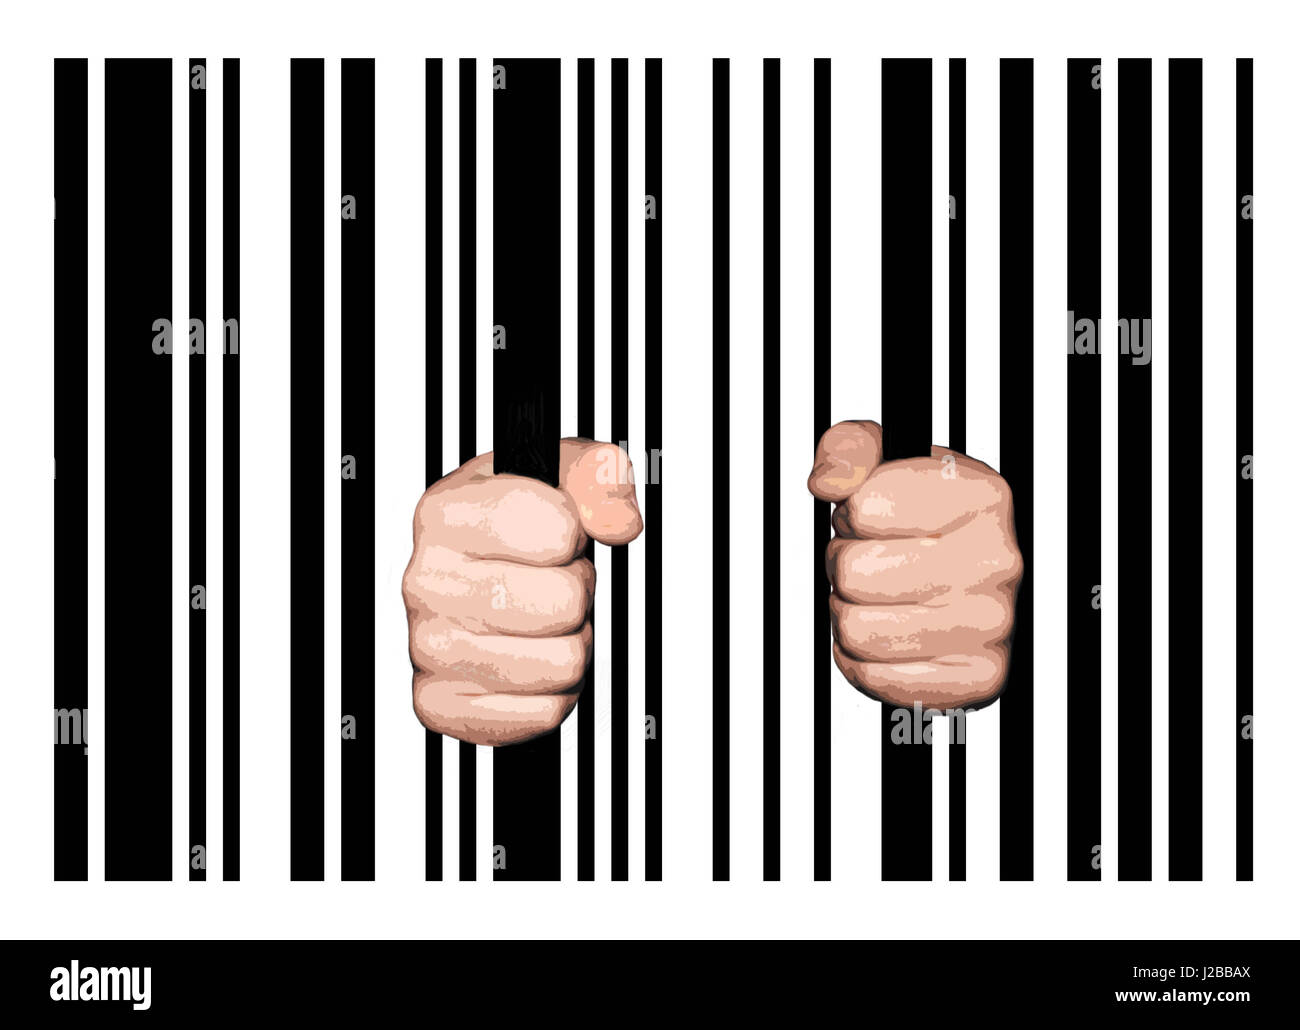 Hands holding barcode stripes as Jail Bars, 3d illustration Stock Photo